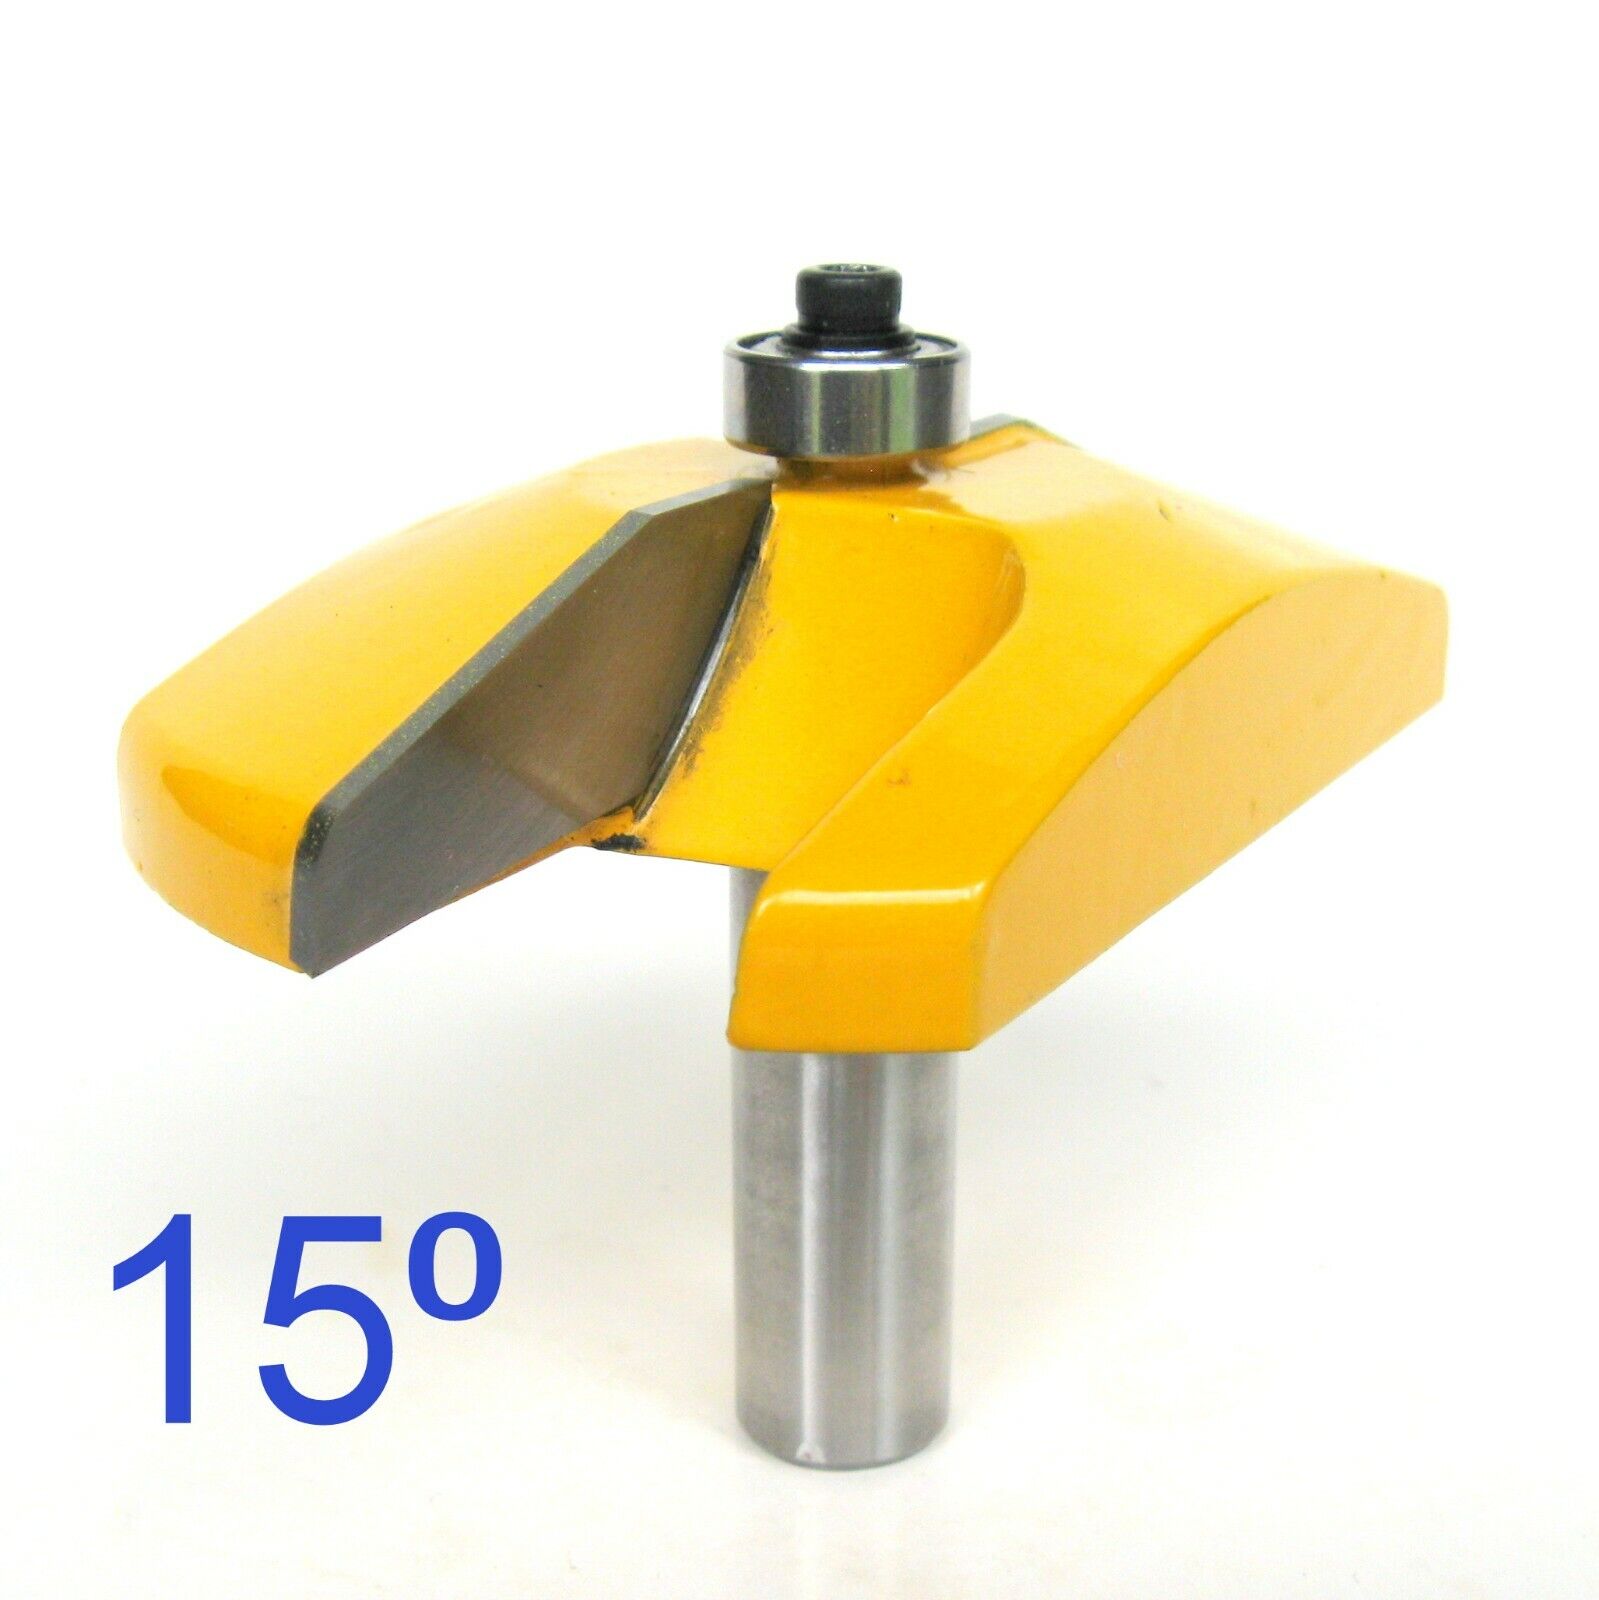 1 pc 1/4" SH 2" Extra Long Straight Router Bit sct-888